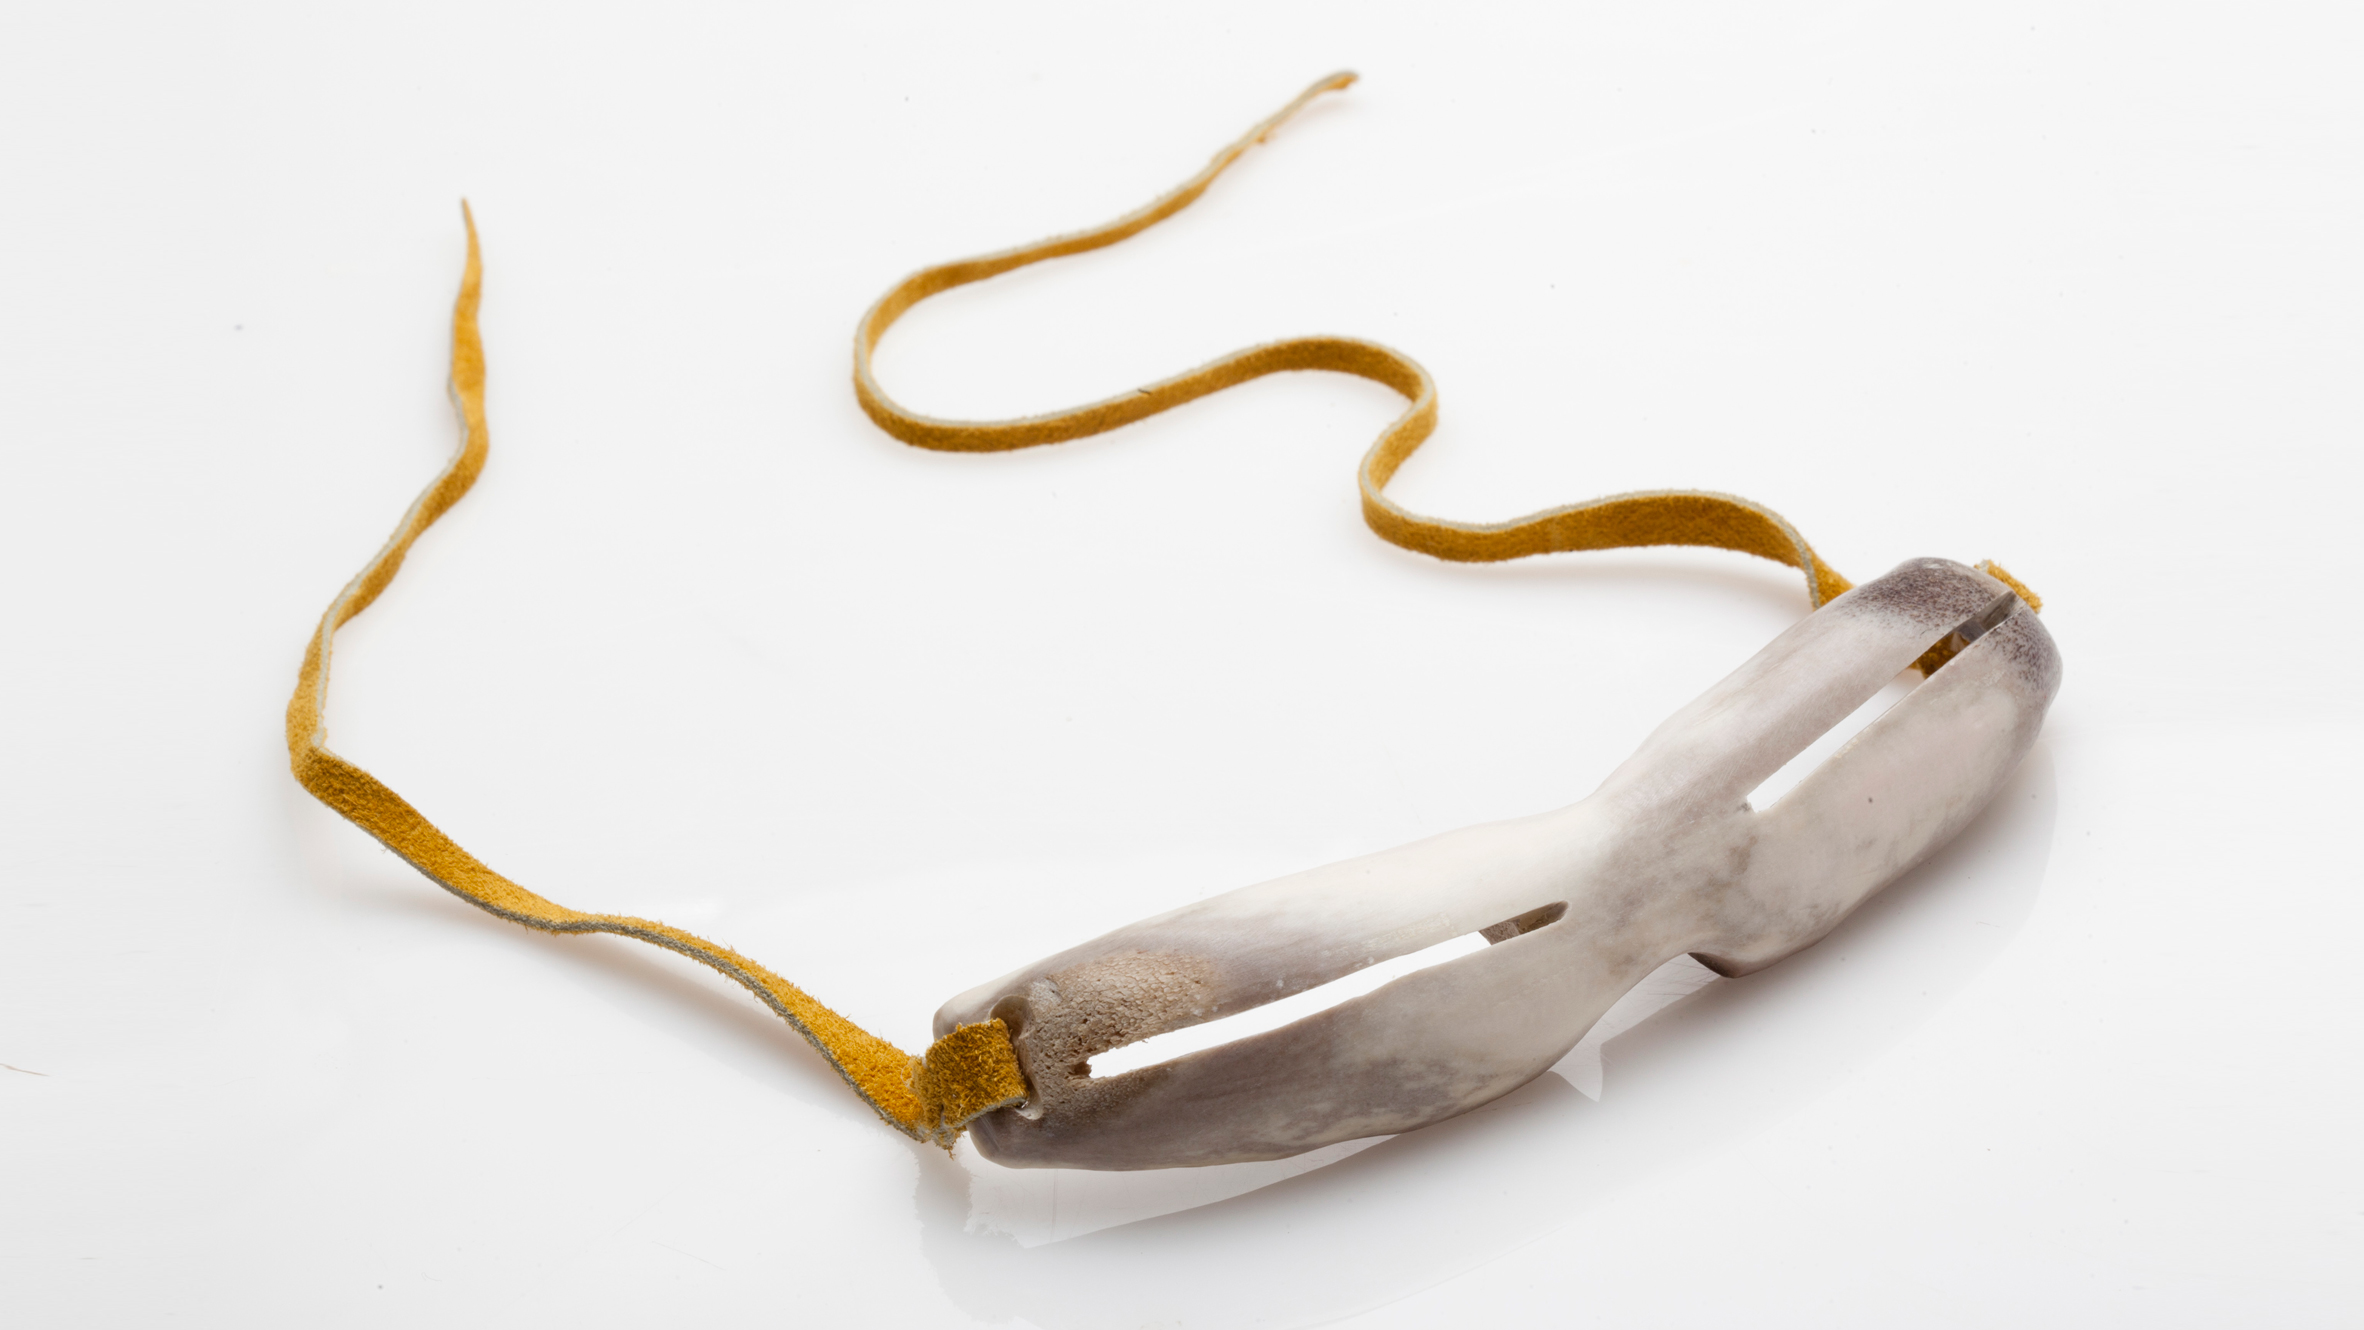 A pair of Inuit snow goggles fashioned from bone. Image courtesy of Design Museum Holon